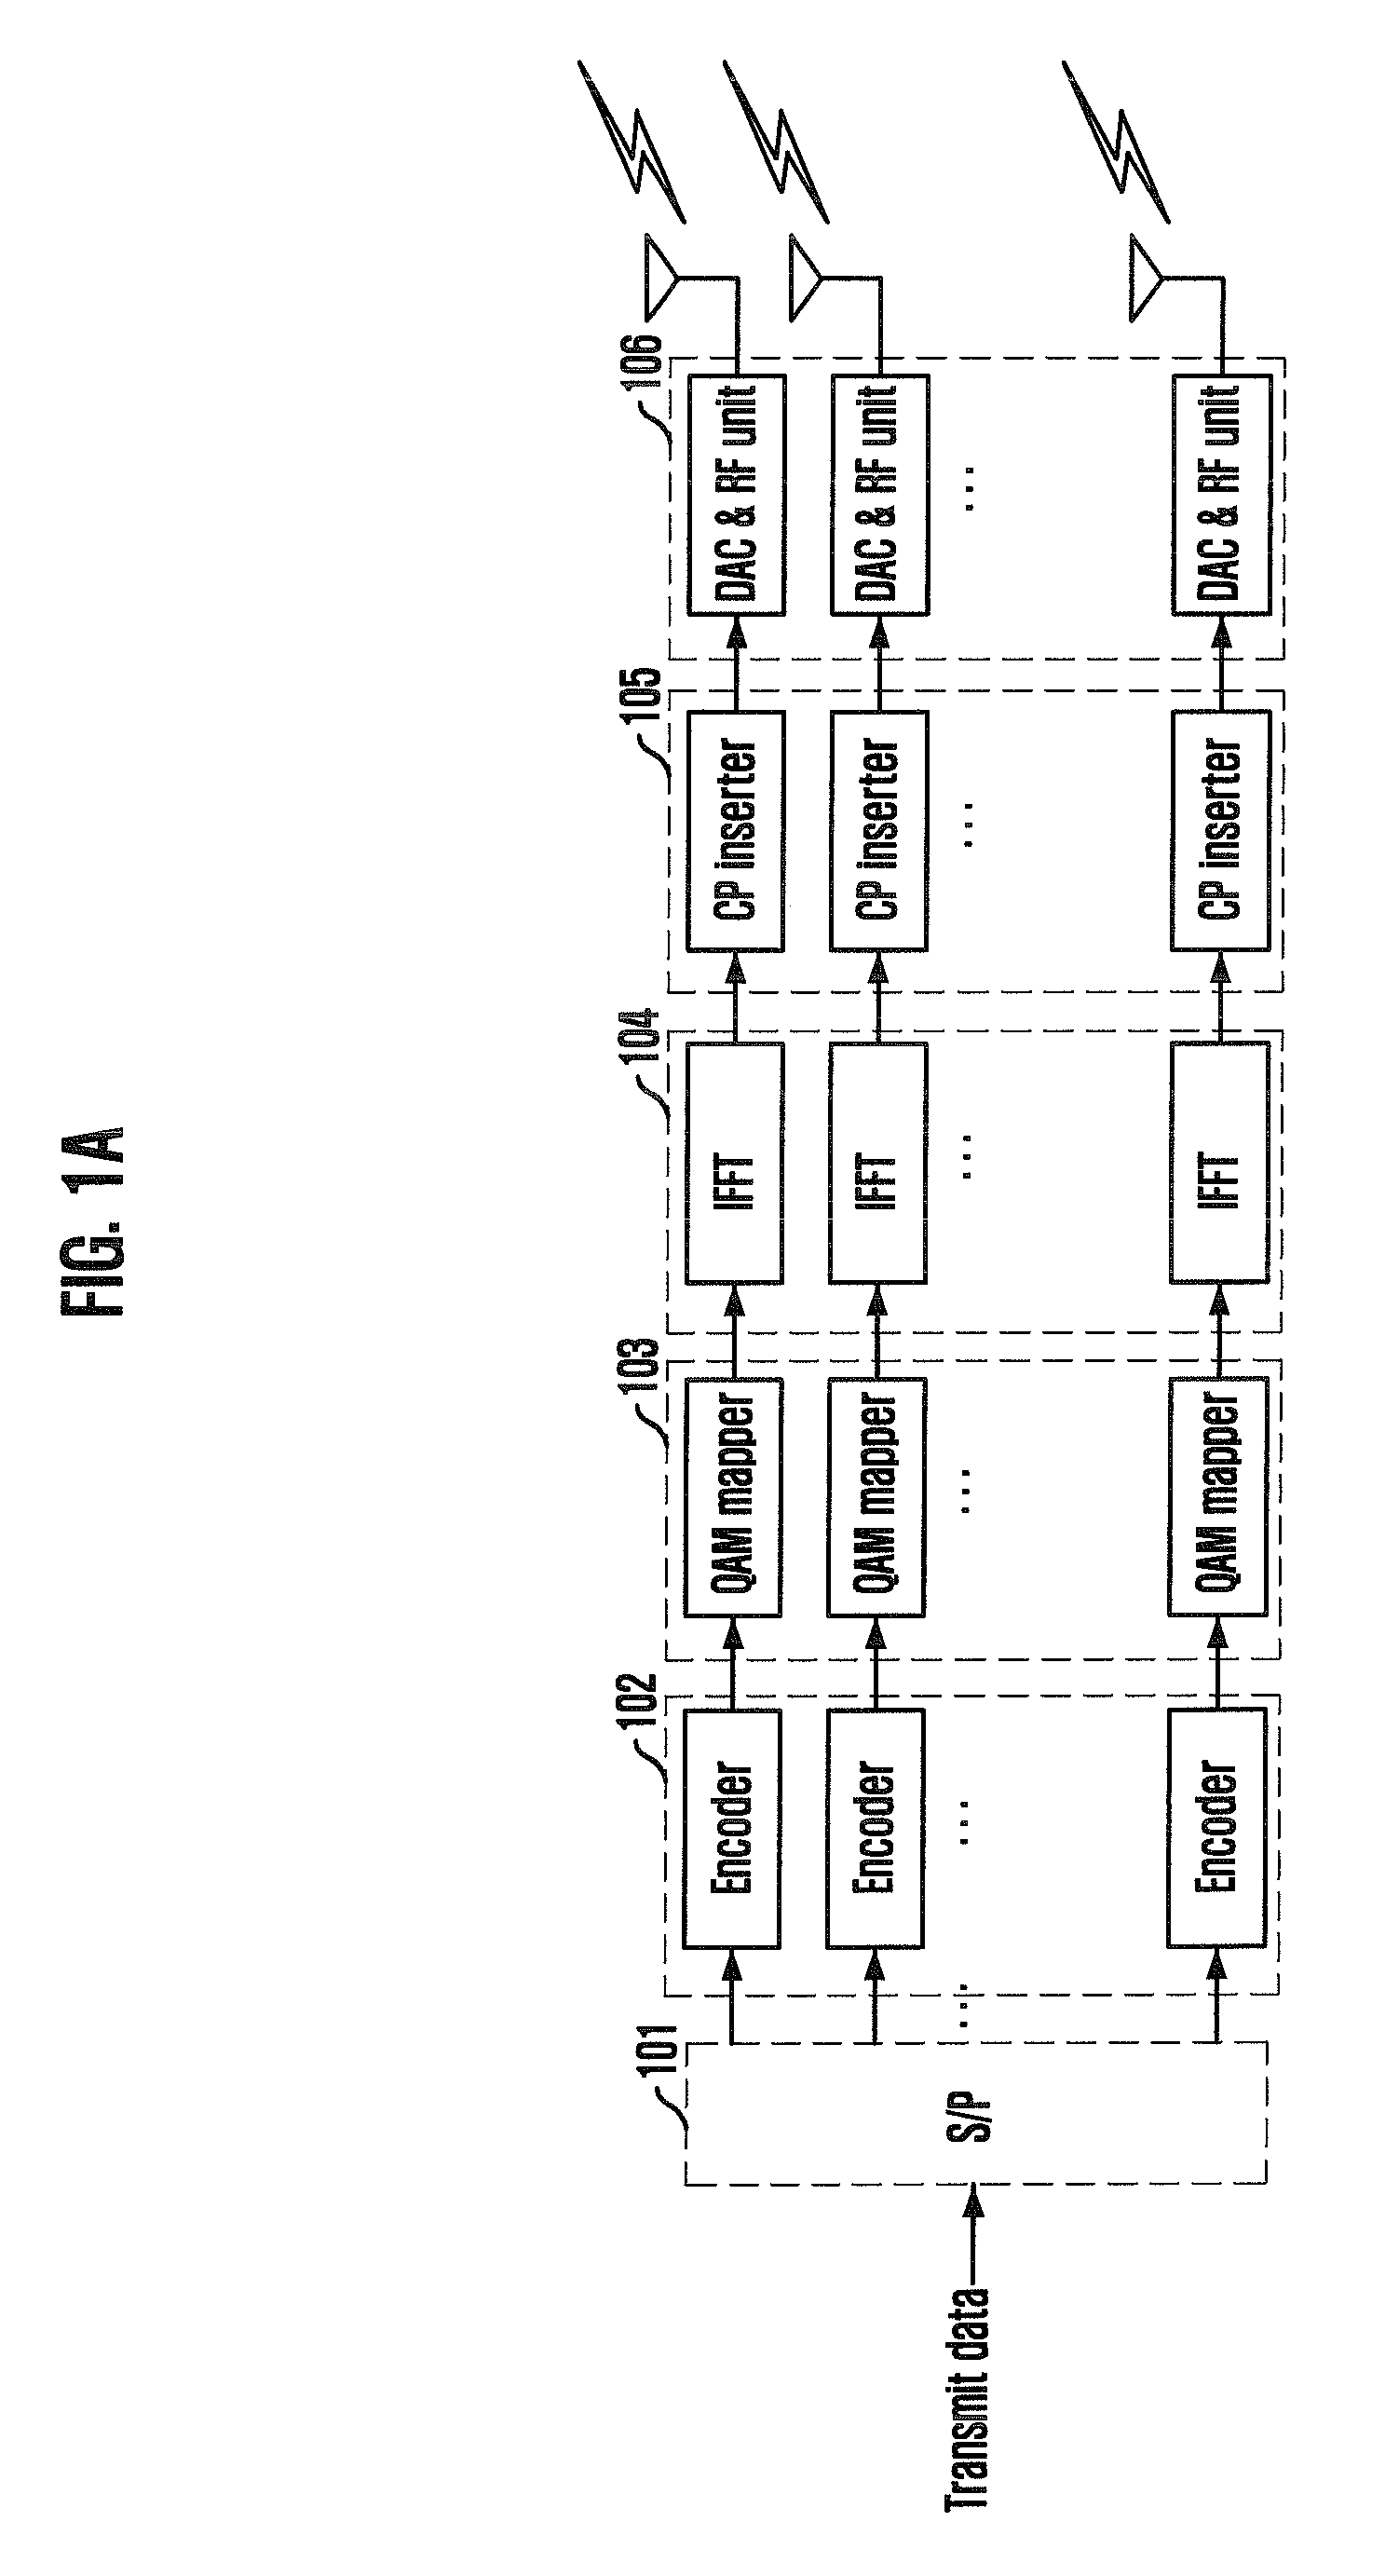 QR decomposition apparatus and method for MIMO system